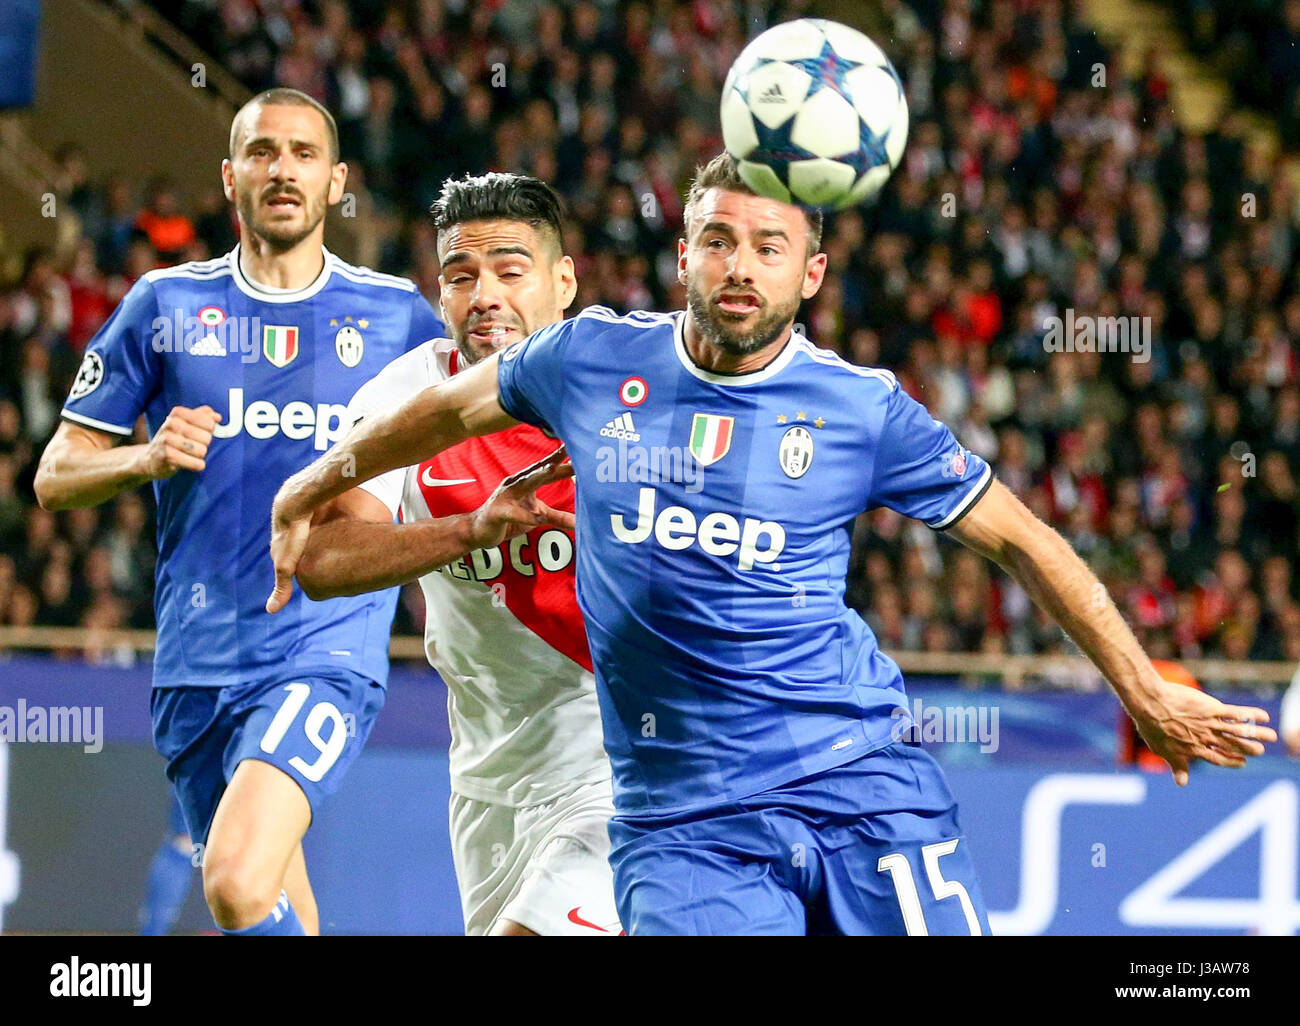 Fontvieille. 3rd May, 2017. Radamel Falcao (C) from Monaco competes with Andrea Barzagli (R) from Juventus during the semifinal first leg match of UEFA Champions League in Fontvieille, Monaco on May 3, 2017. Juventus won 2-0. Credit: Serge Haouzi/Xinhua/Alamy Live News Stock Photo